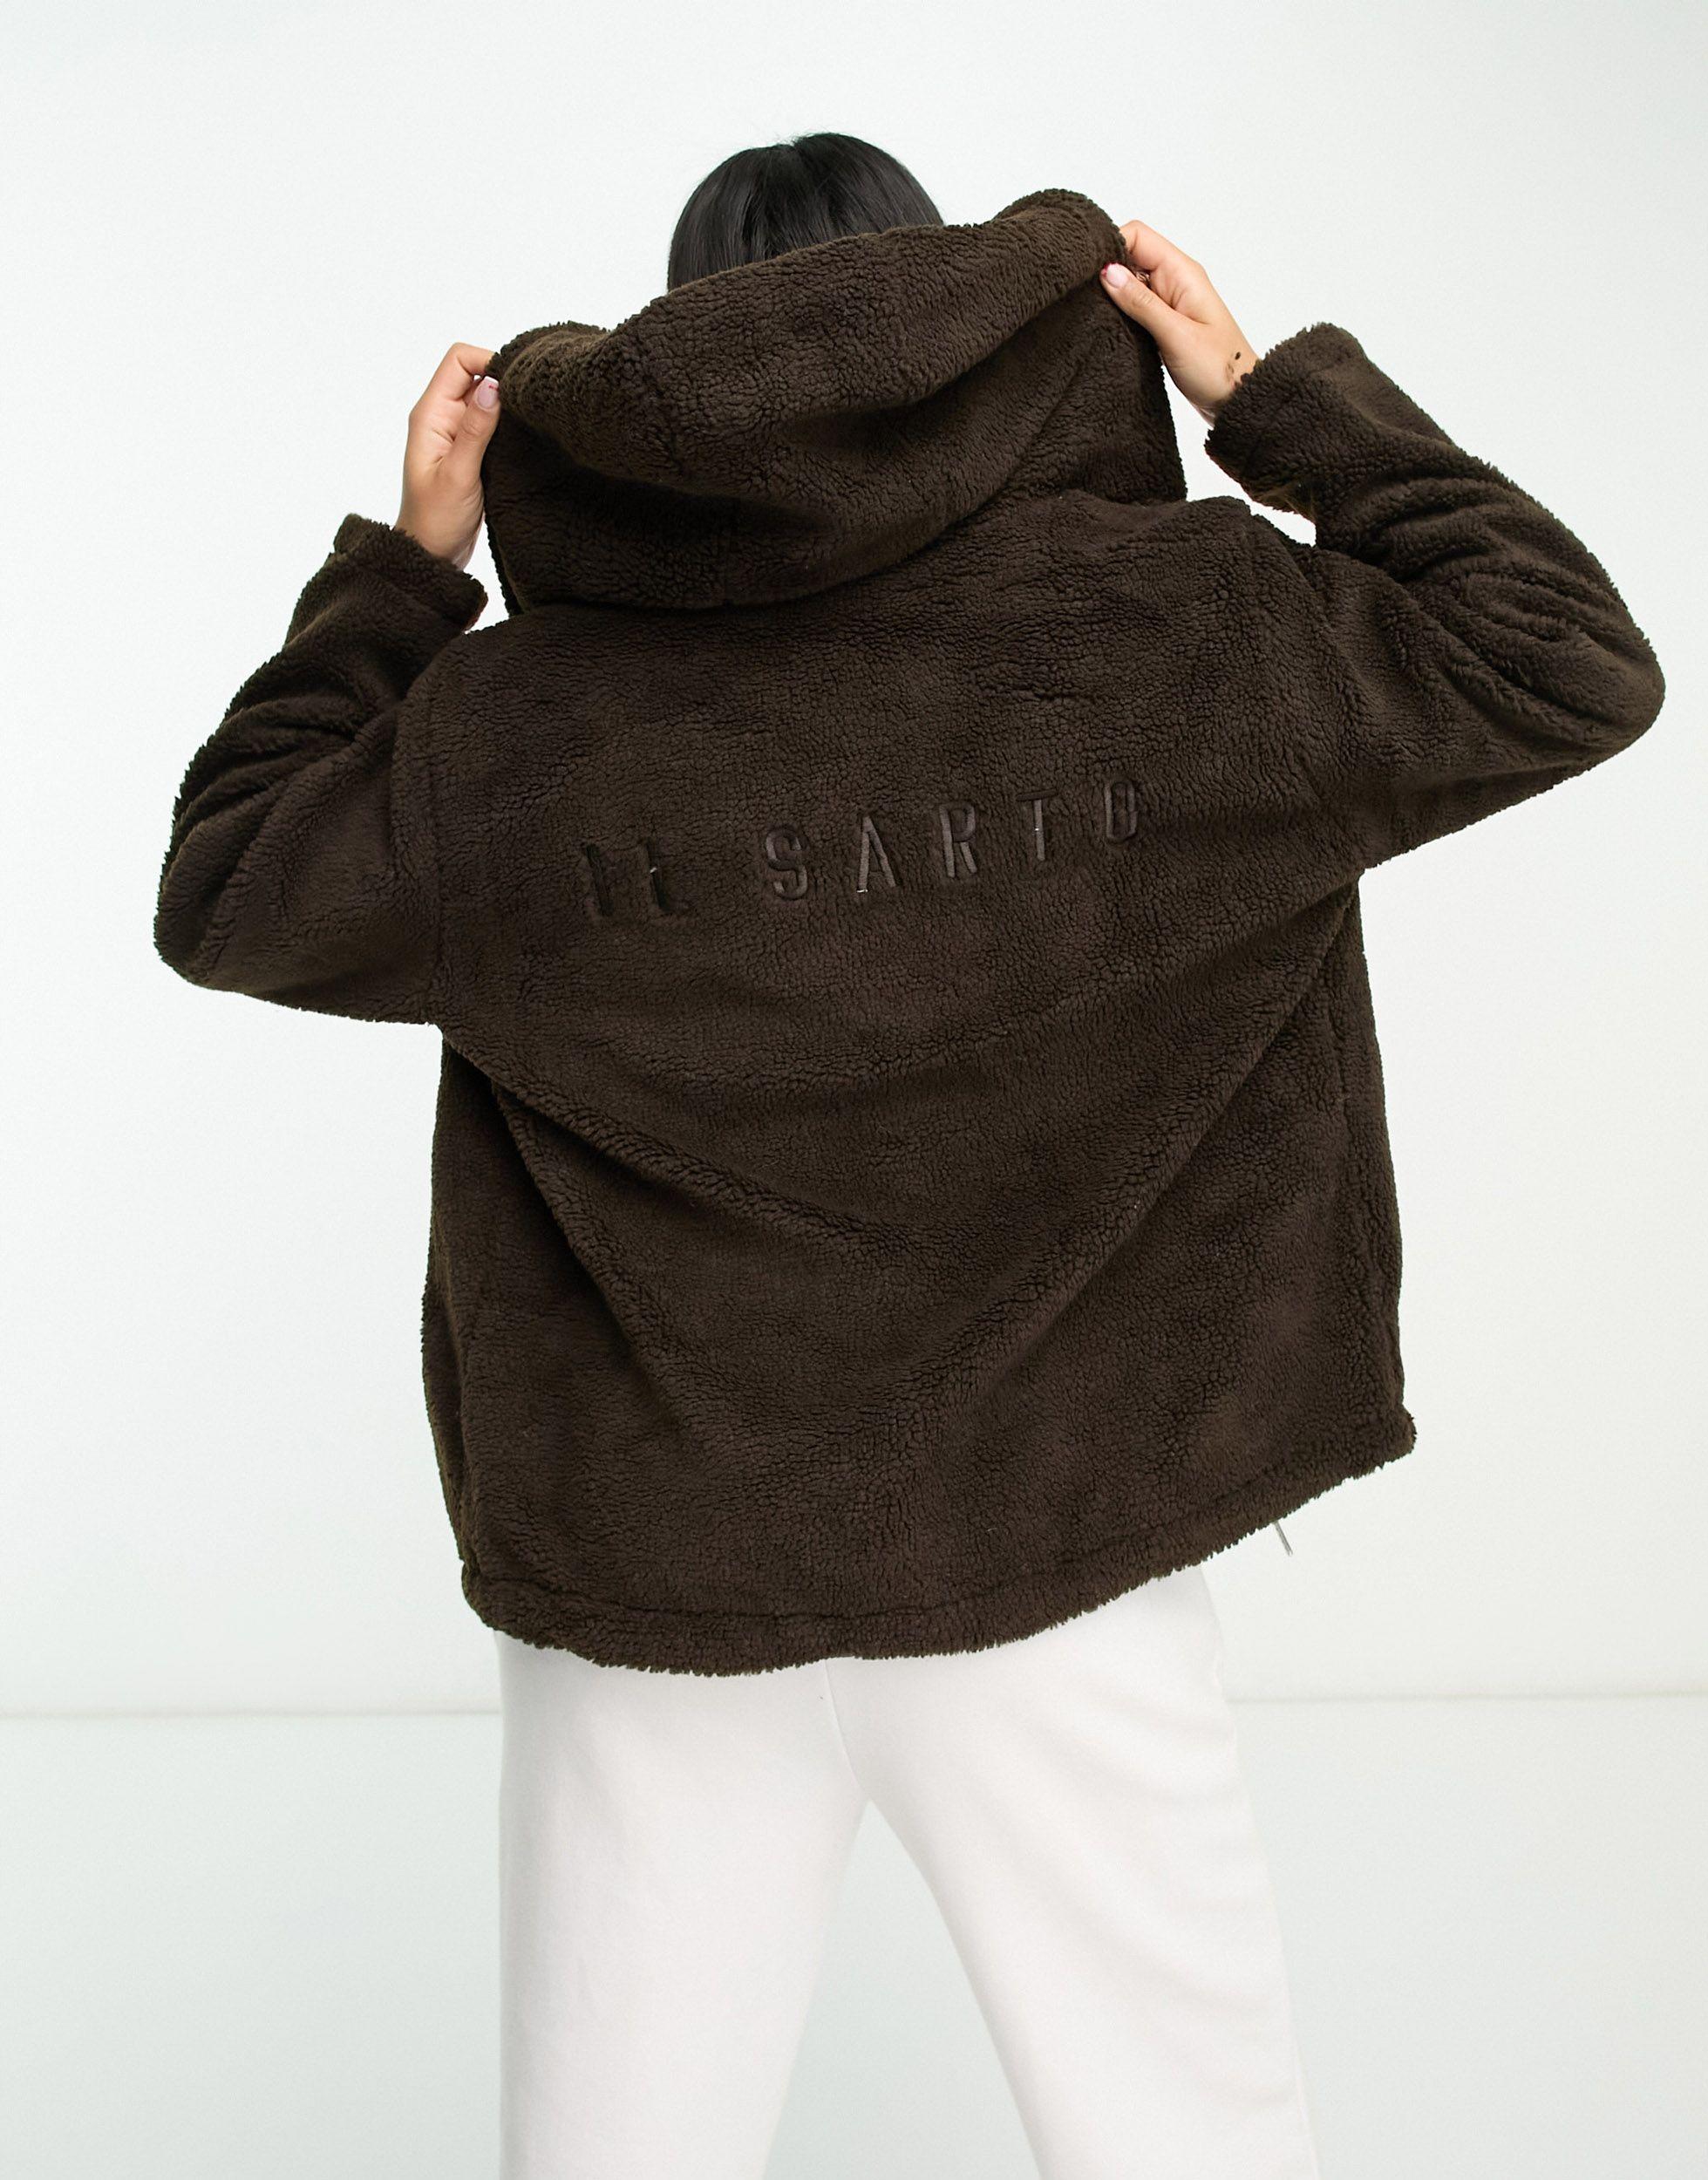 Il Sarto Oversized Borg Jacket With Hood in Black | Lyst